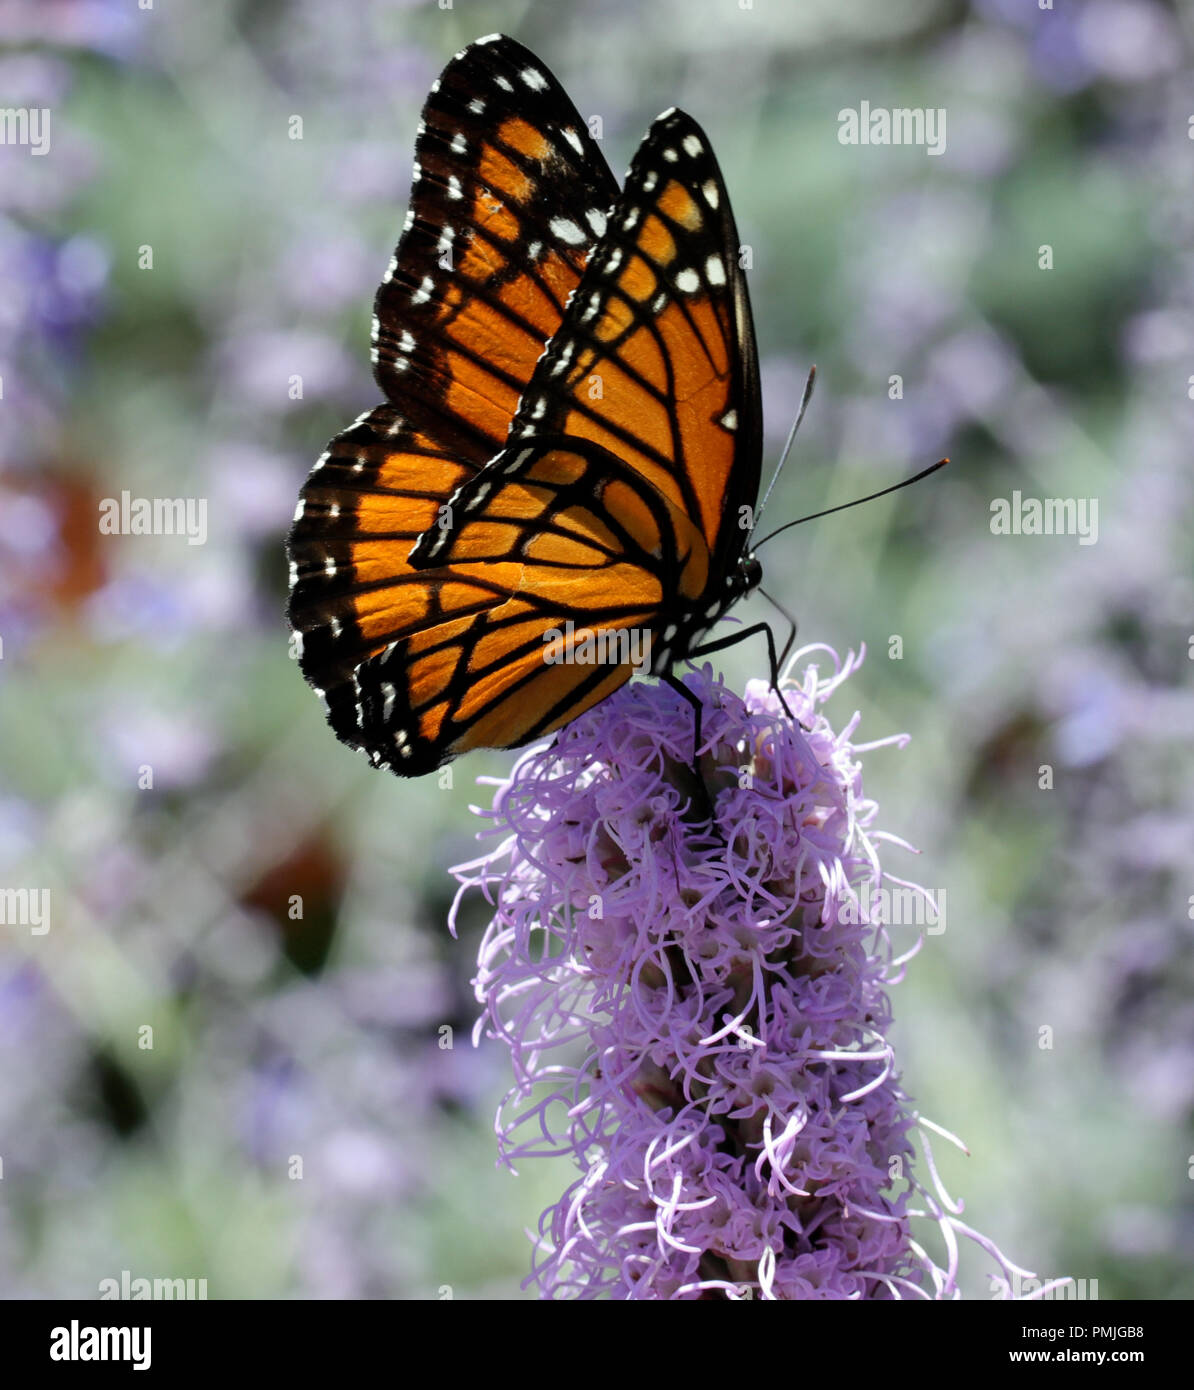 A Viceroy butterfly (Limenitis archippus), a Müllerian mimic of the Monarch butterfly, feeding on Liatris spicata in a New England flower garden Stock Photo